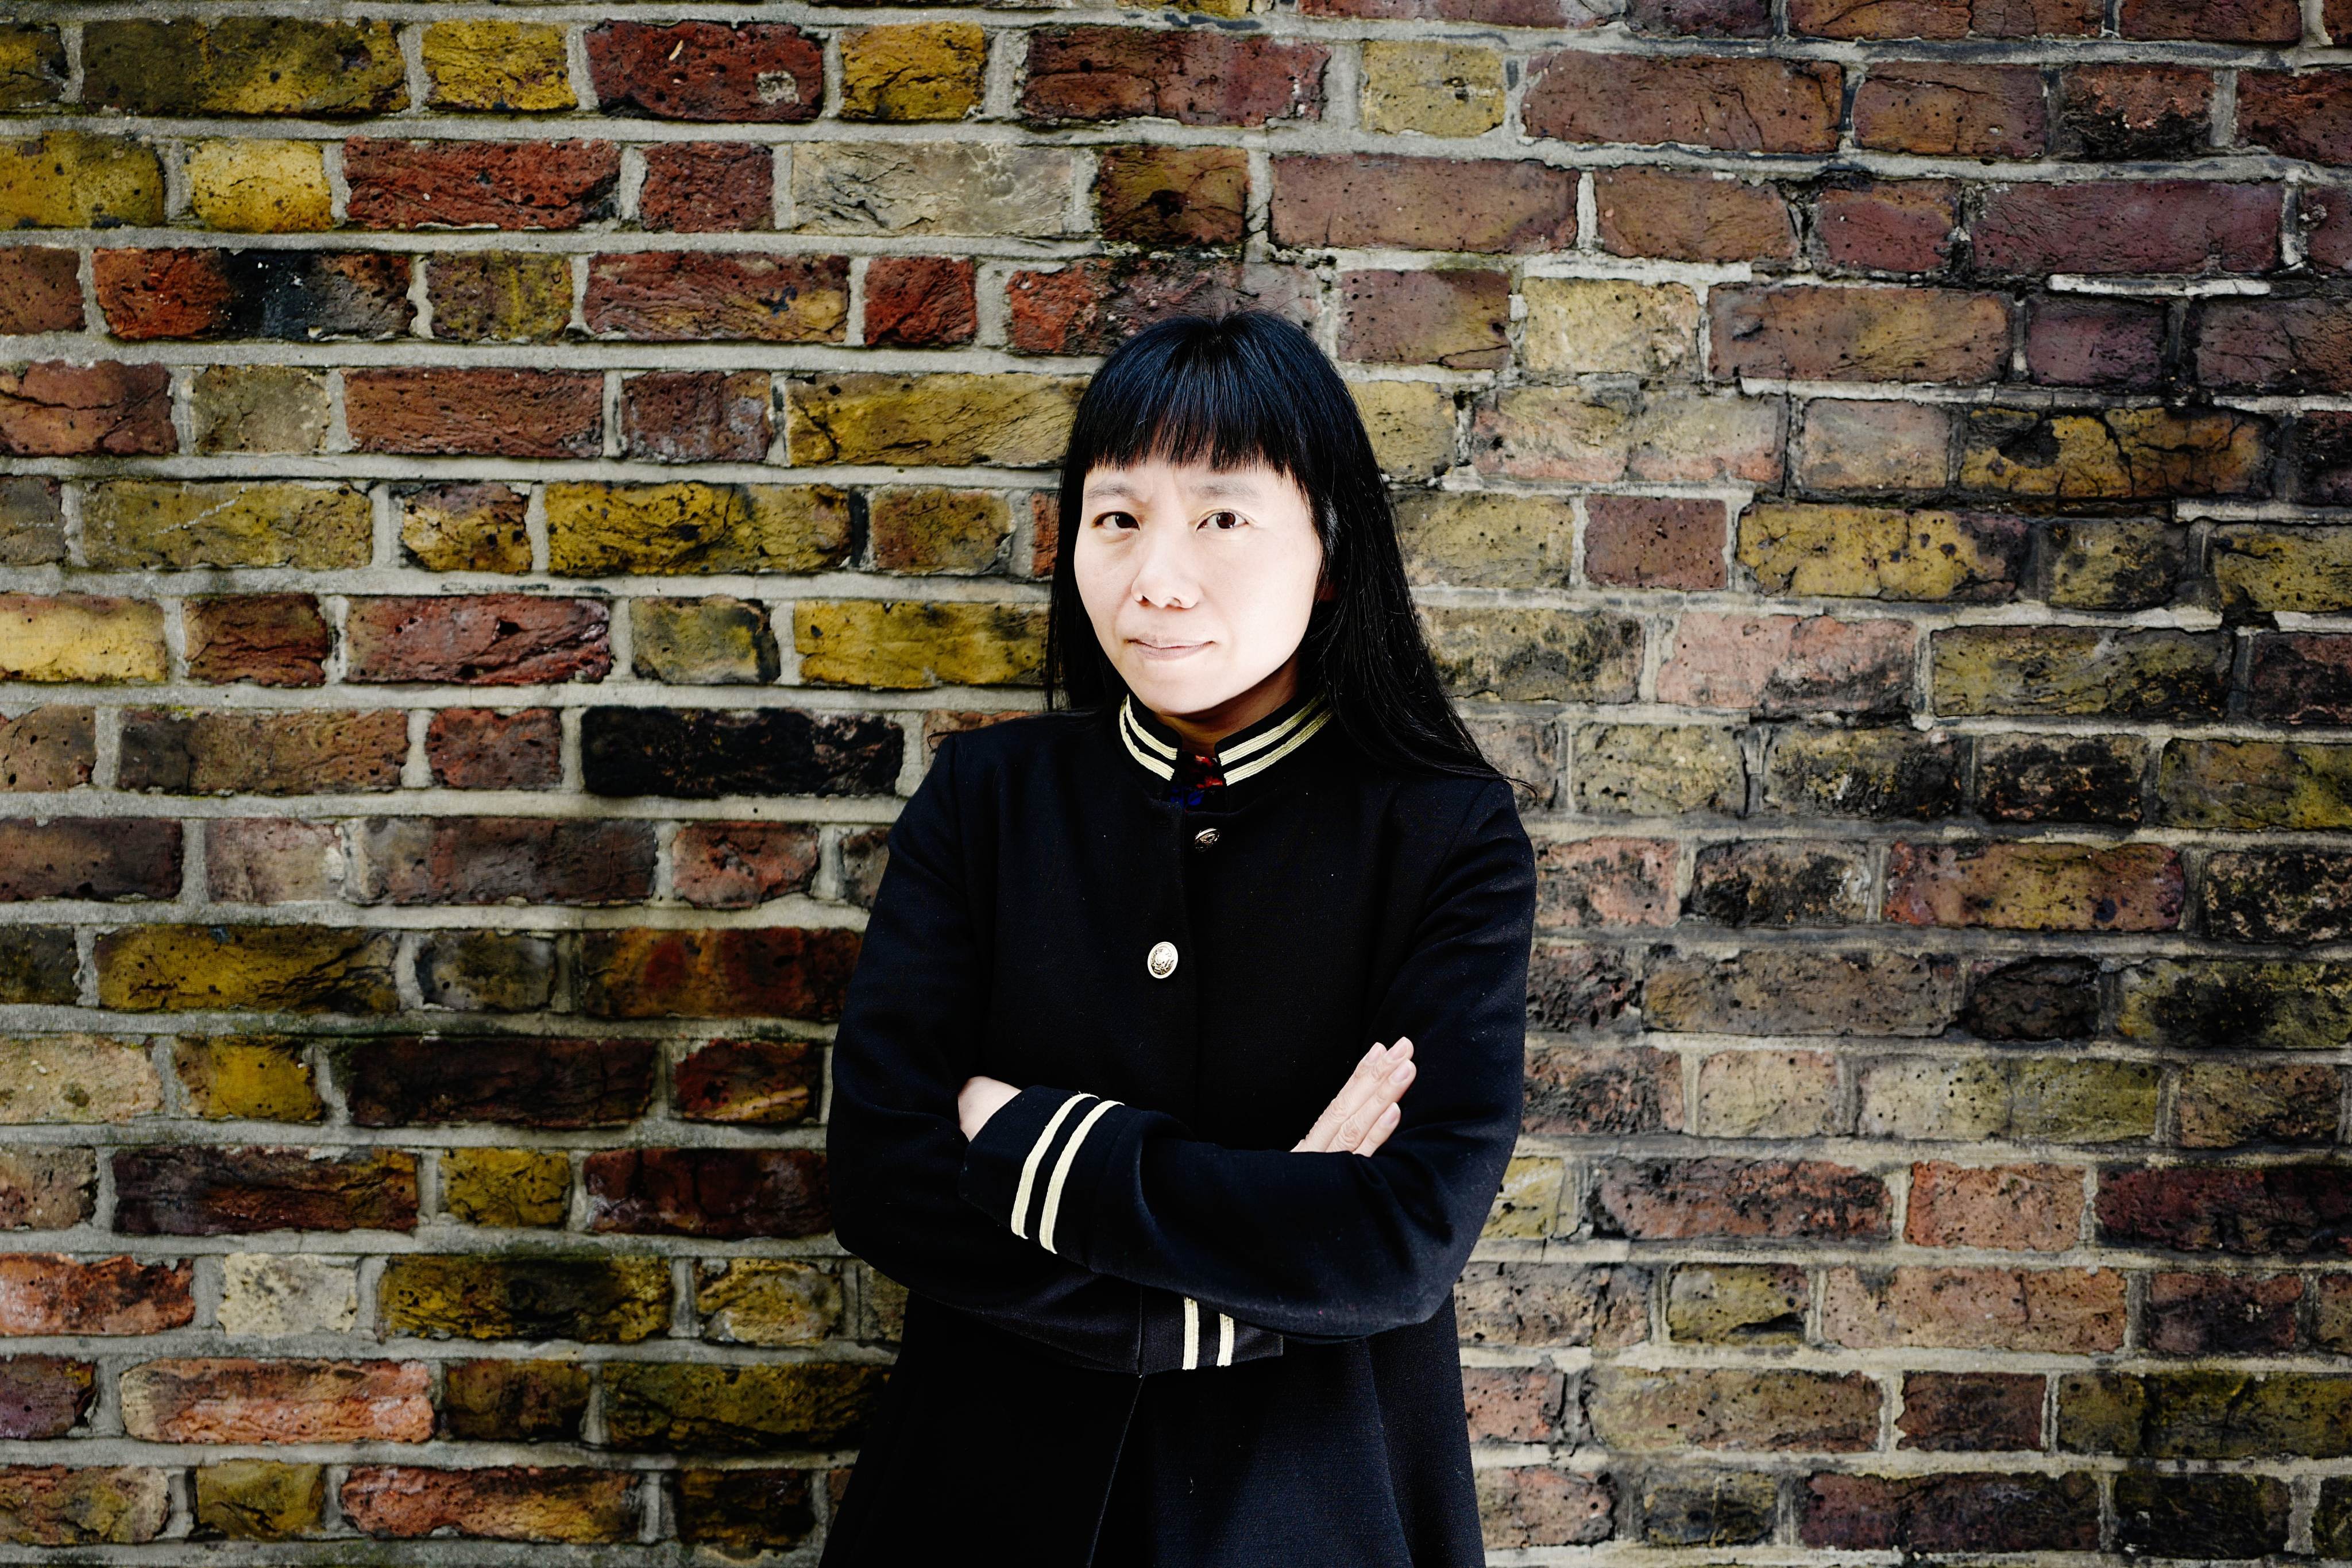 Xiaolu Guo will appear to discuss her book A Lover’s Discourse at this year’s Hong Kong International Literary Festival. Photo: Ki Price